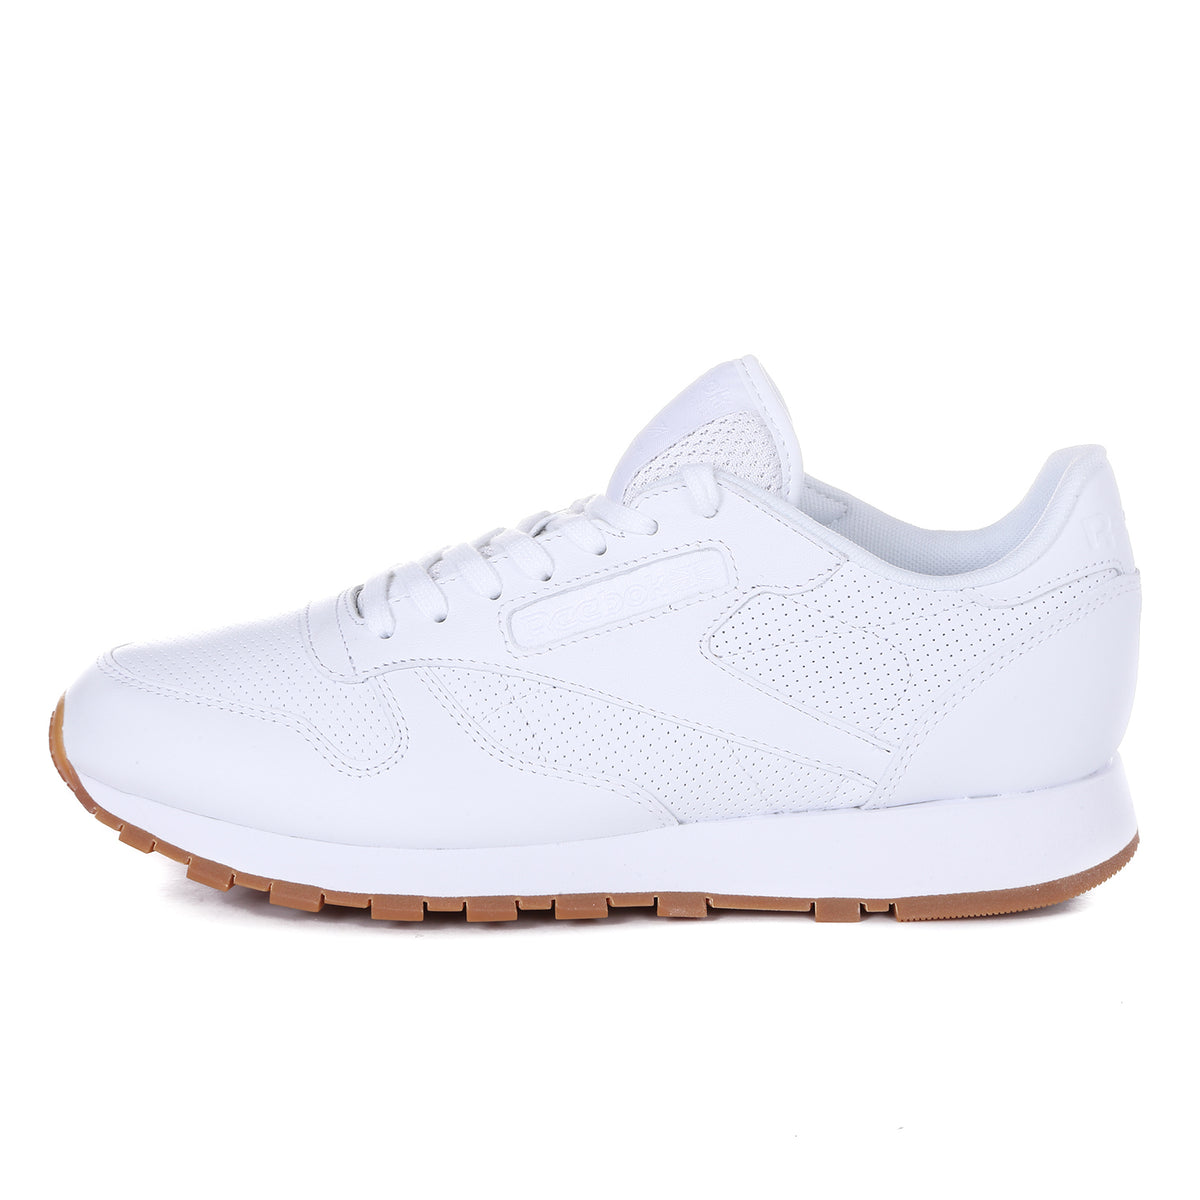 Reebok - Classic Leather PG - White/Carbon/Snowy Green